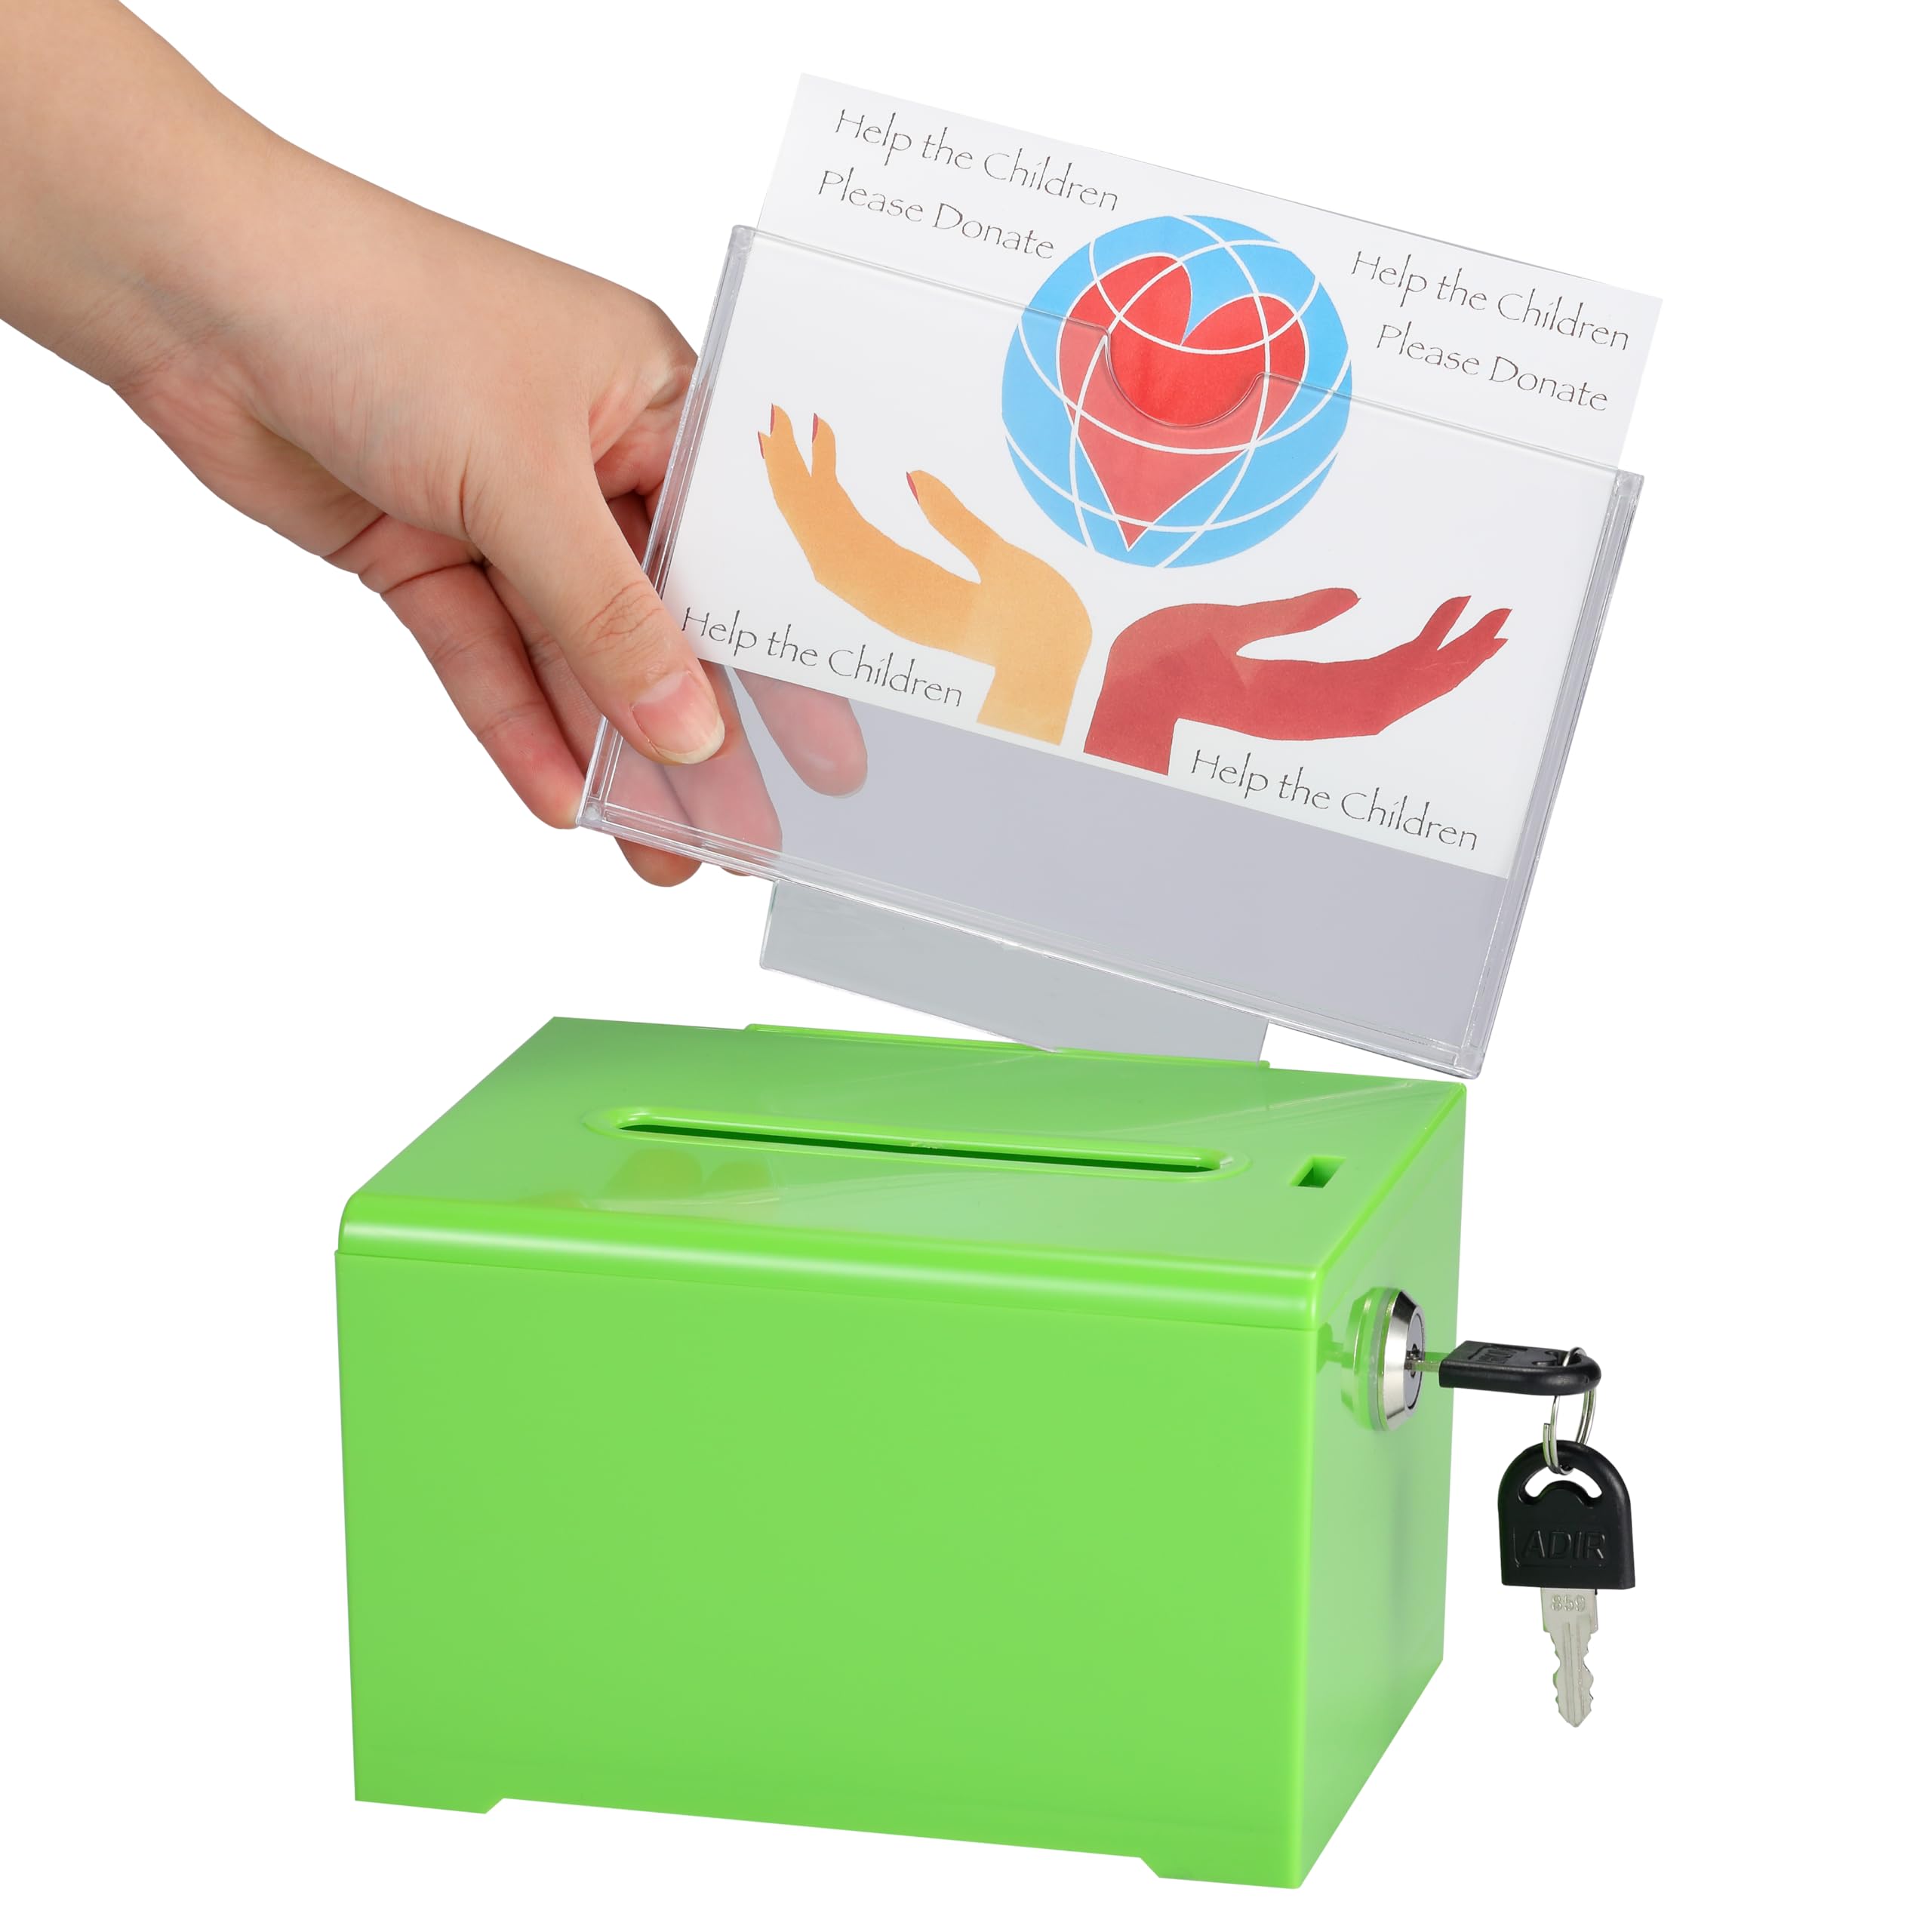 Adir Donation Box with Lock � Acrylic Suggestion Box with Slot, Ballot Lock Box with Sign Holder for Raffle, Tip Jar, Voting, Comments - Cash Donation Boxes for Fundraising (6.25x4.5x 4 Inches)  - Like New